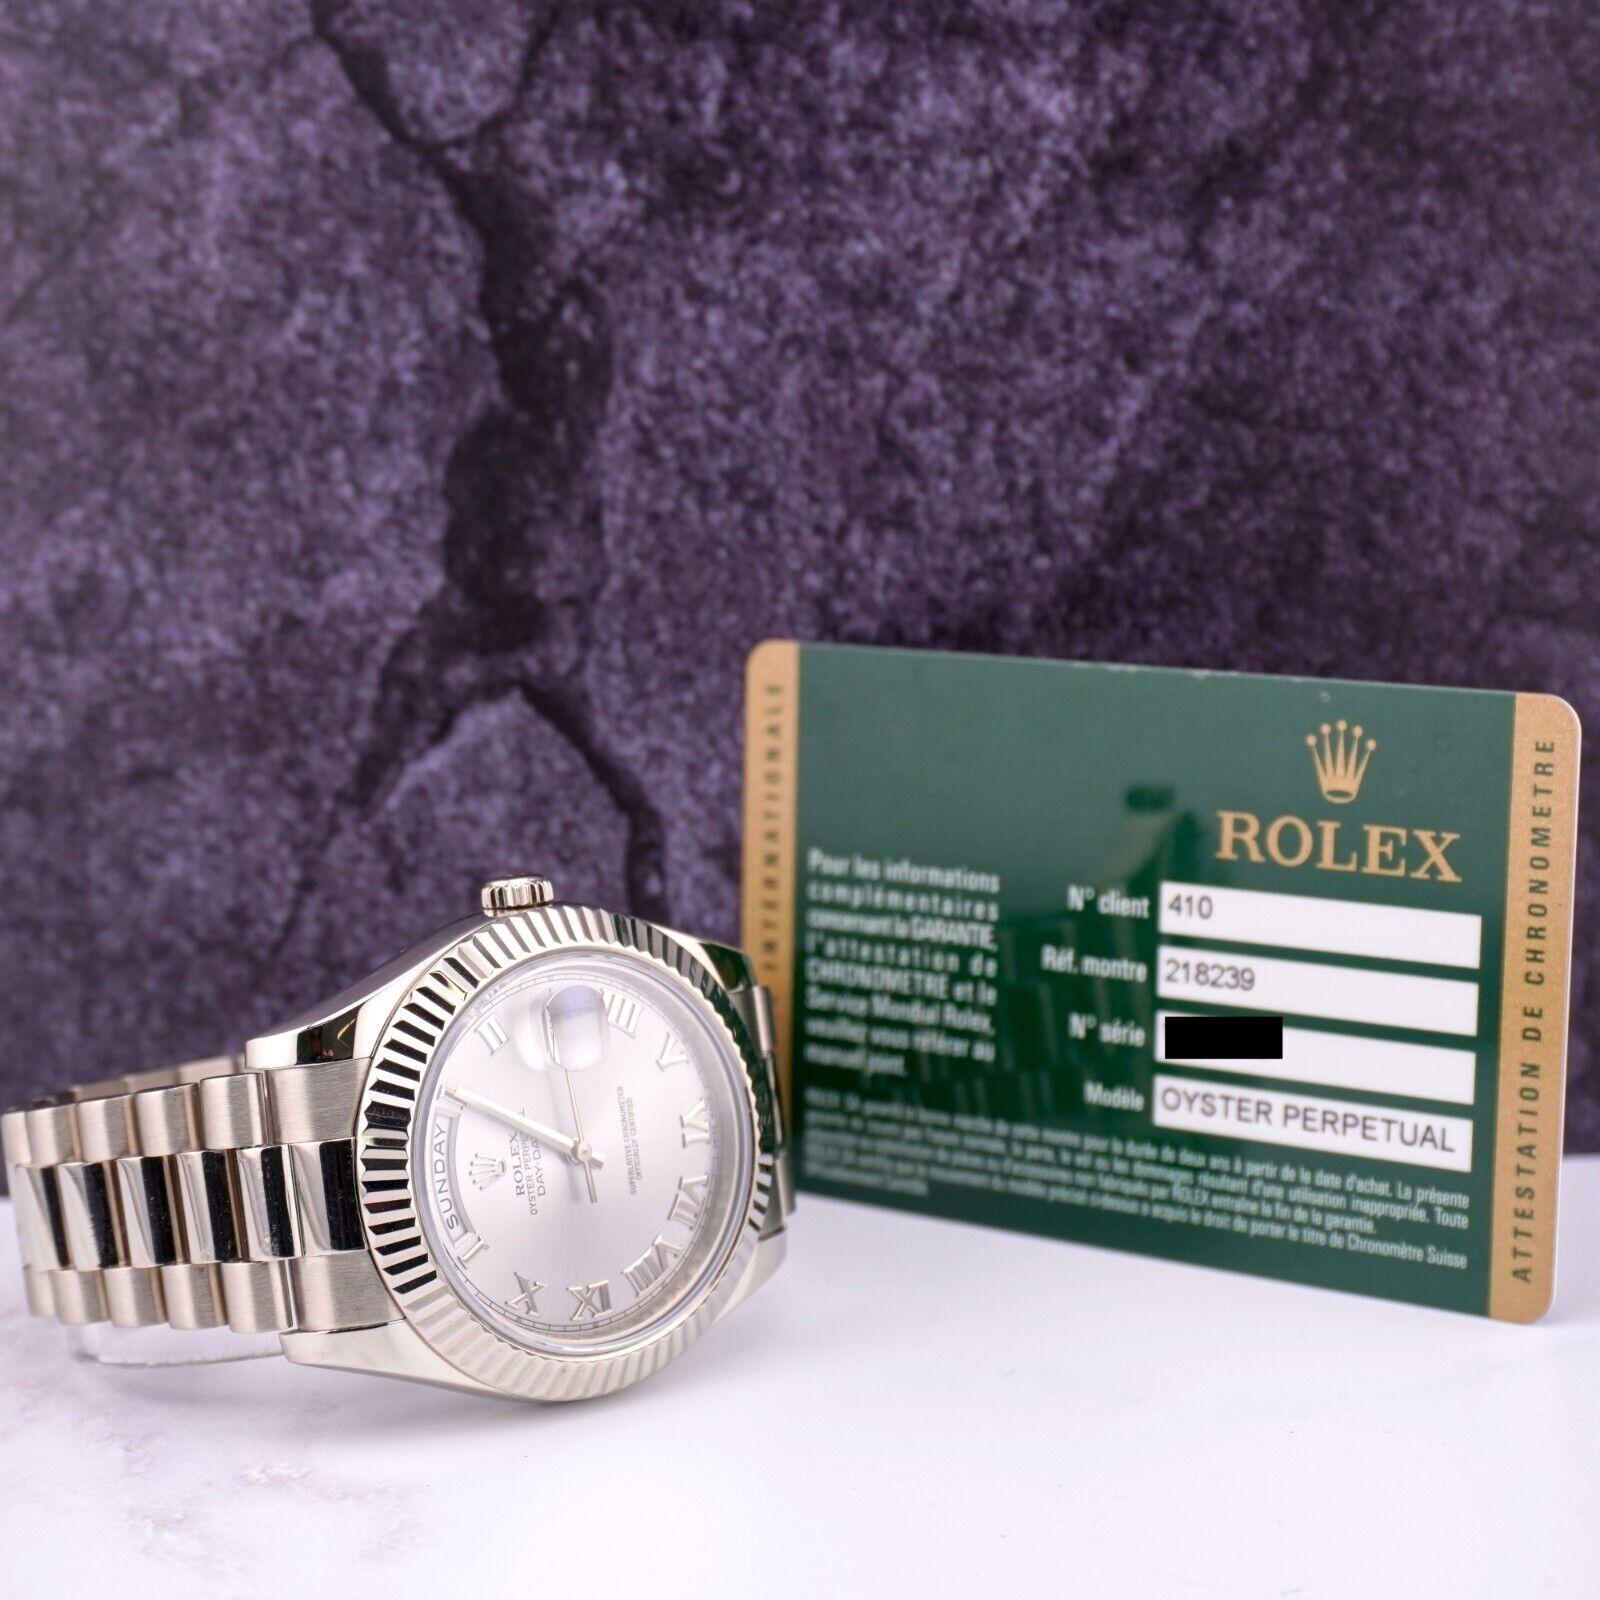 Rolex Day-Date 40 President 18k White Gold Men's Watch Silver DIAL Ref: 218239 For Sale 5